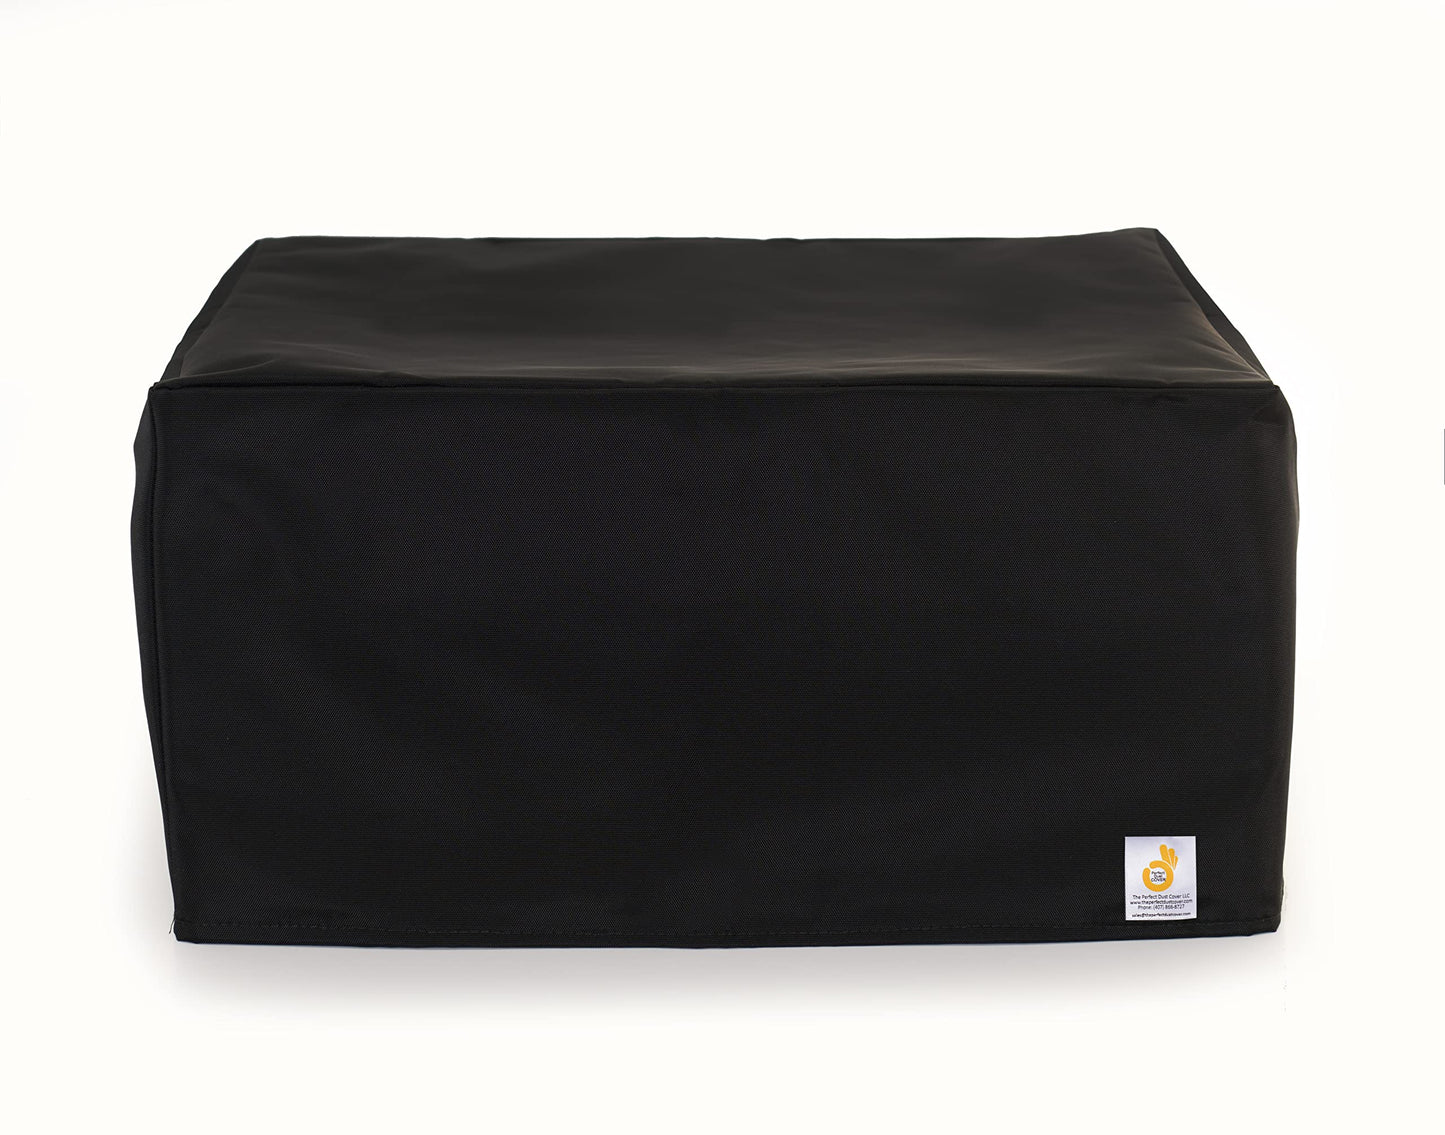 The Perfect Dust Cover, Black Nylon Cover for Canon Pixma TR4500 Wireless Inkjet Printer, Anti Static Double Stitched and Waterproof Cover by The Perfect Dust Cover LLC